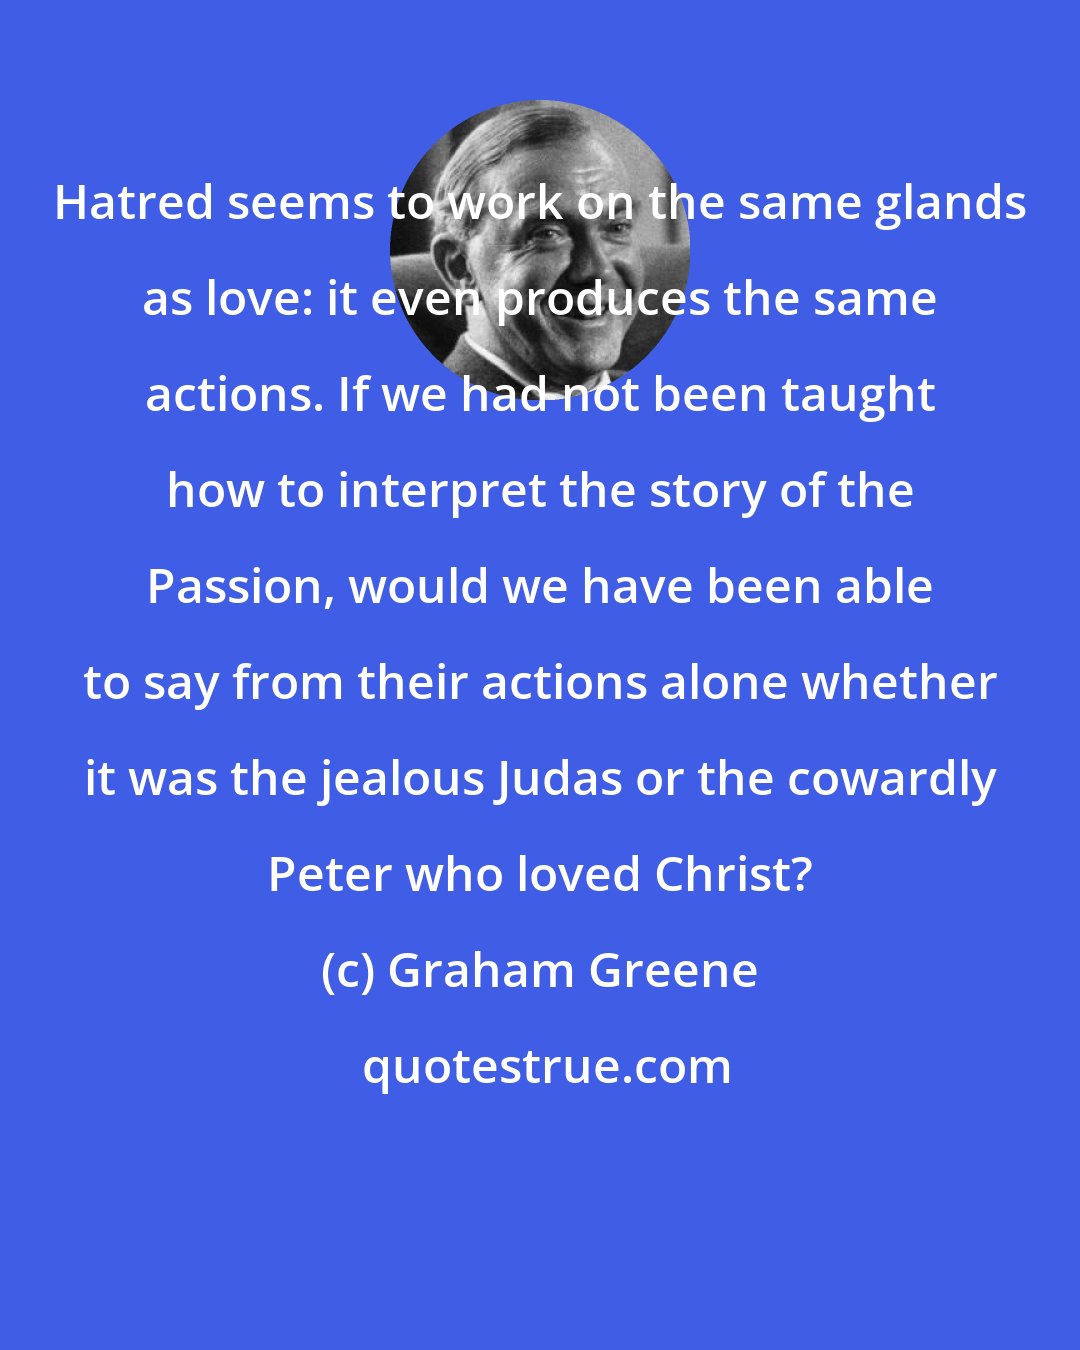 Graham Greene: Hatred seems to work on the same glands as love: it even produces the same actions. If we had not been taught how to interpret the story of the Passion, would we have been able to say from their actions alone whether it was the jealous Judas or the cowardly Peter who loved Christ?